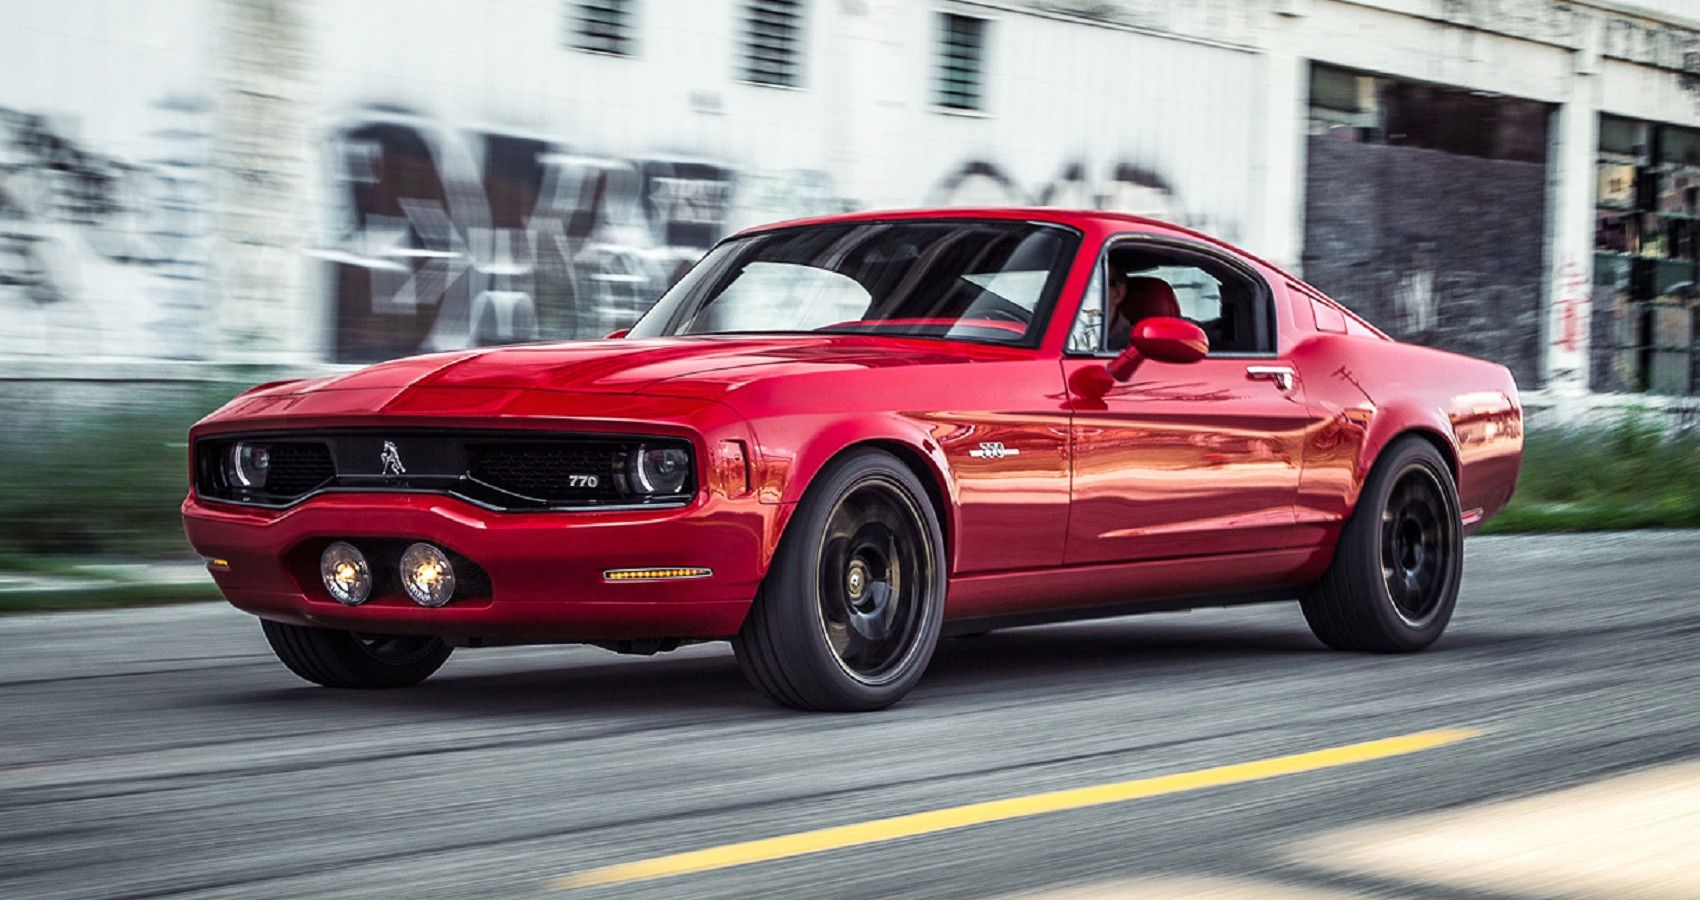 Equus Bass 770 (red) - Front